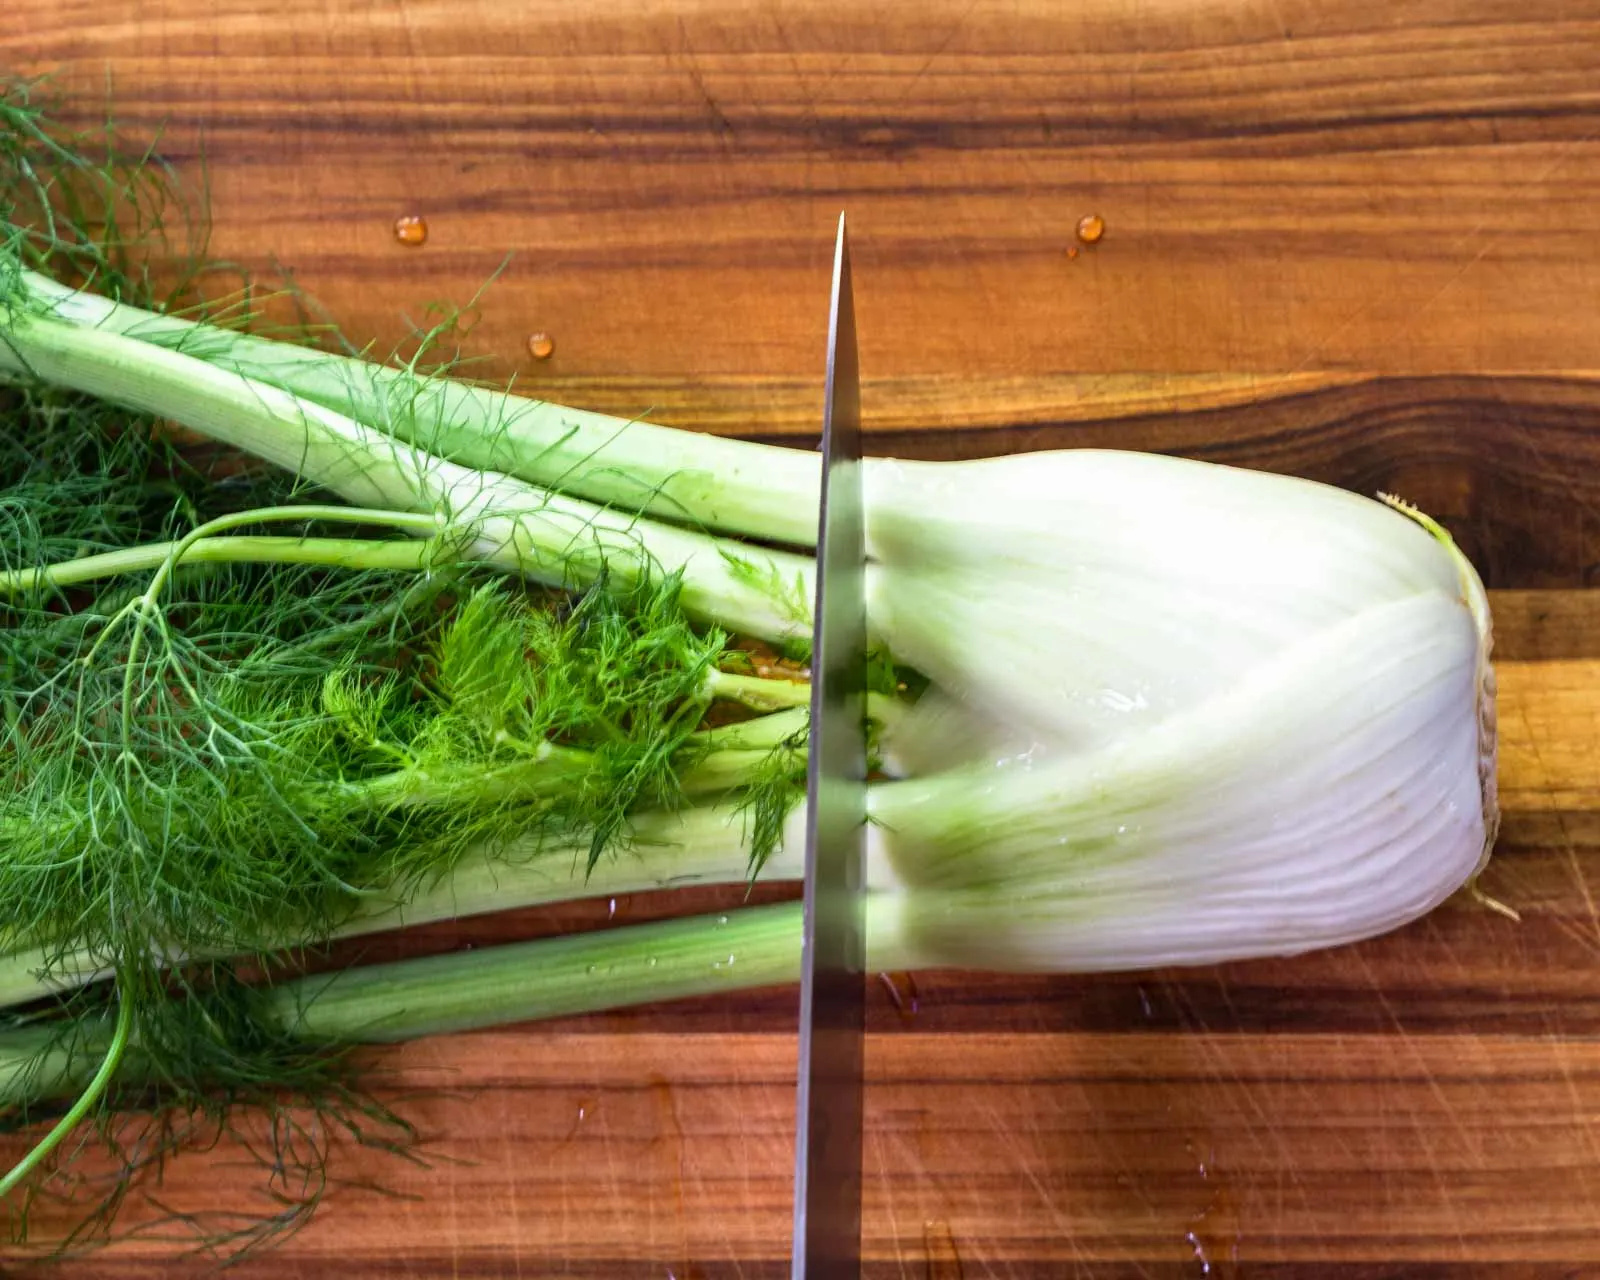 A fennel bulb showing how to cut the top off.